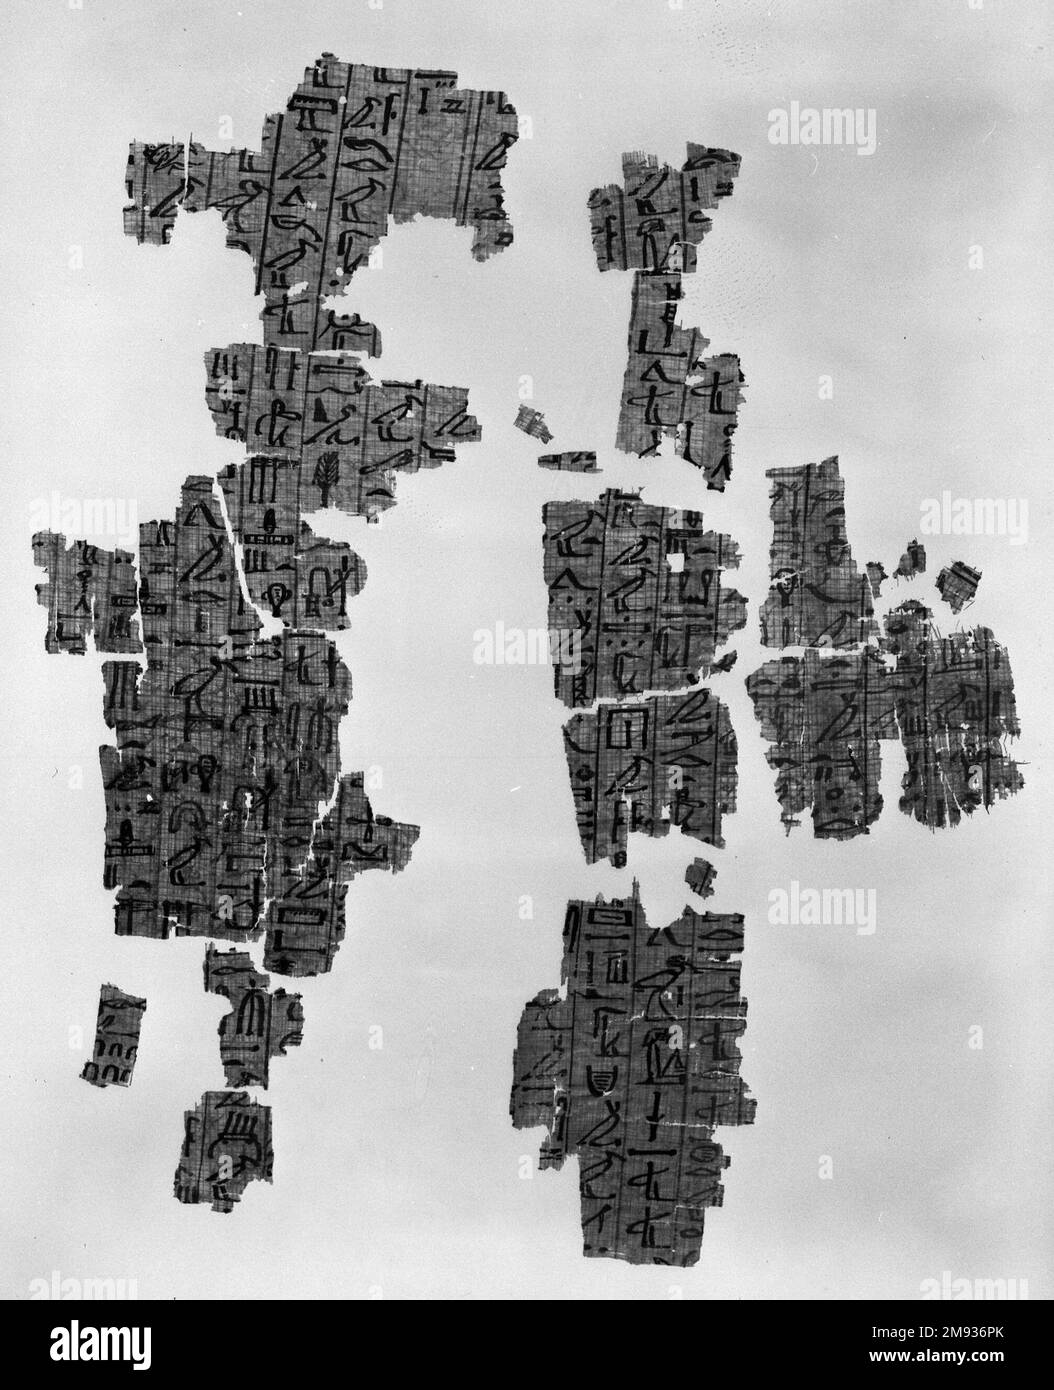 Fragments from a Book of the Dead Fragments from a Book of the Dead, ca. 1539-1190 B.C.E. Papyrus, ink, Glass: 12 3/16 x 13 1/2 in. (31 x 34.3 cm).   Egyptian, Classical, Ancient Near Eastern Art ca. 1539-1190 B.C.E. Stock Photo